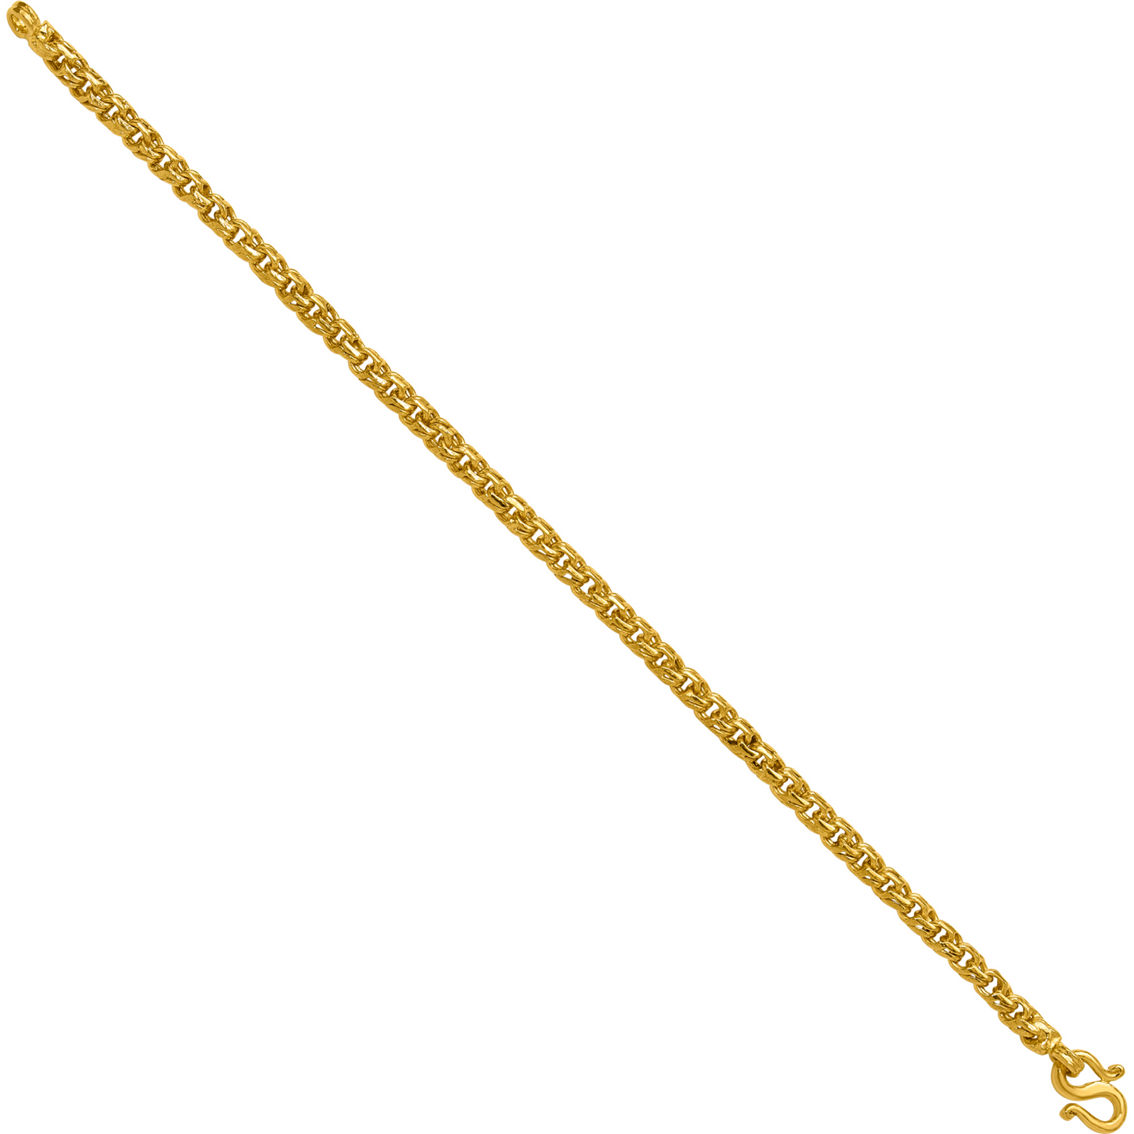 24K Pure Gold 4.4mm Solid Double Interlocking Curb Chain 8 in. Bracelet - Image 3 of 5